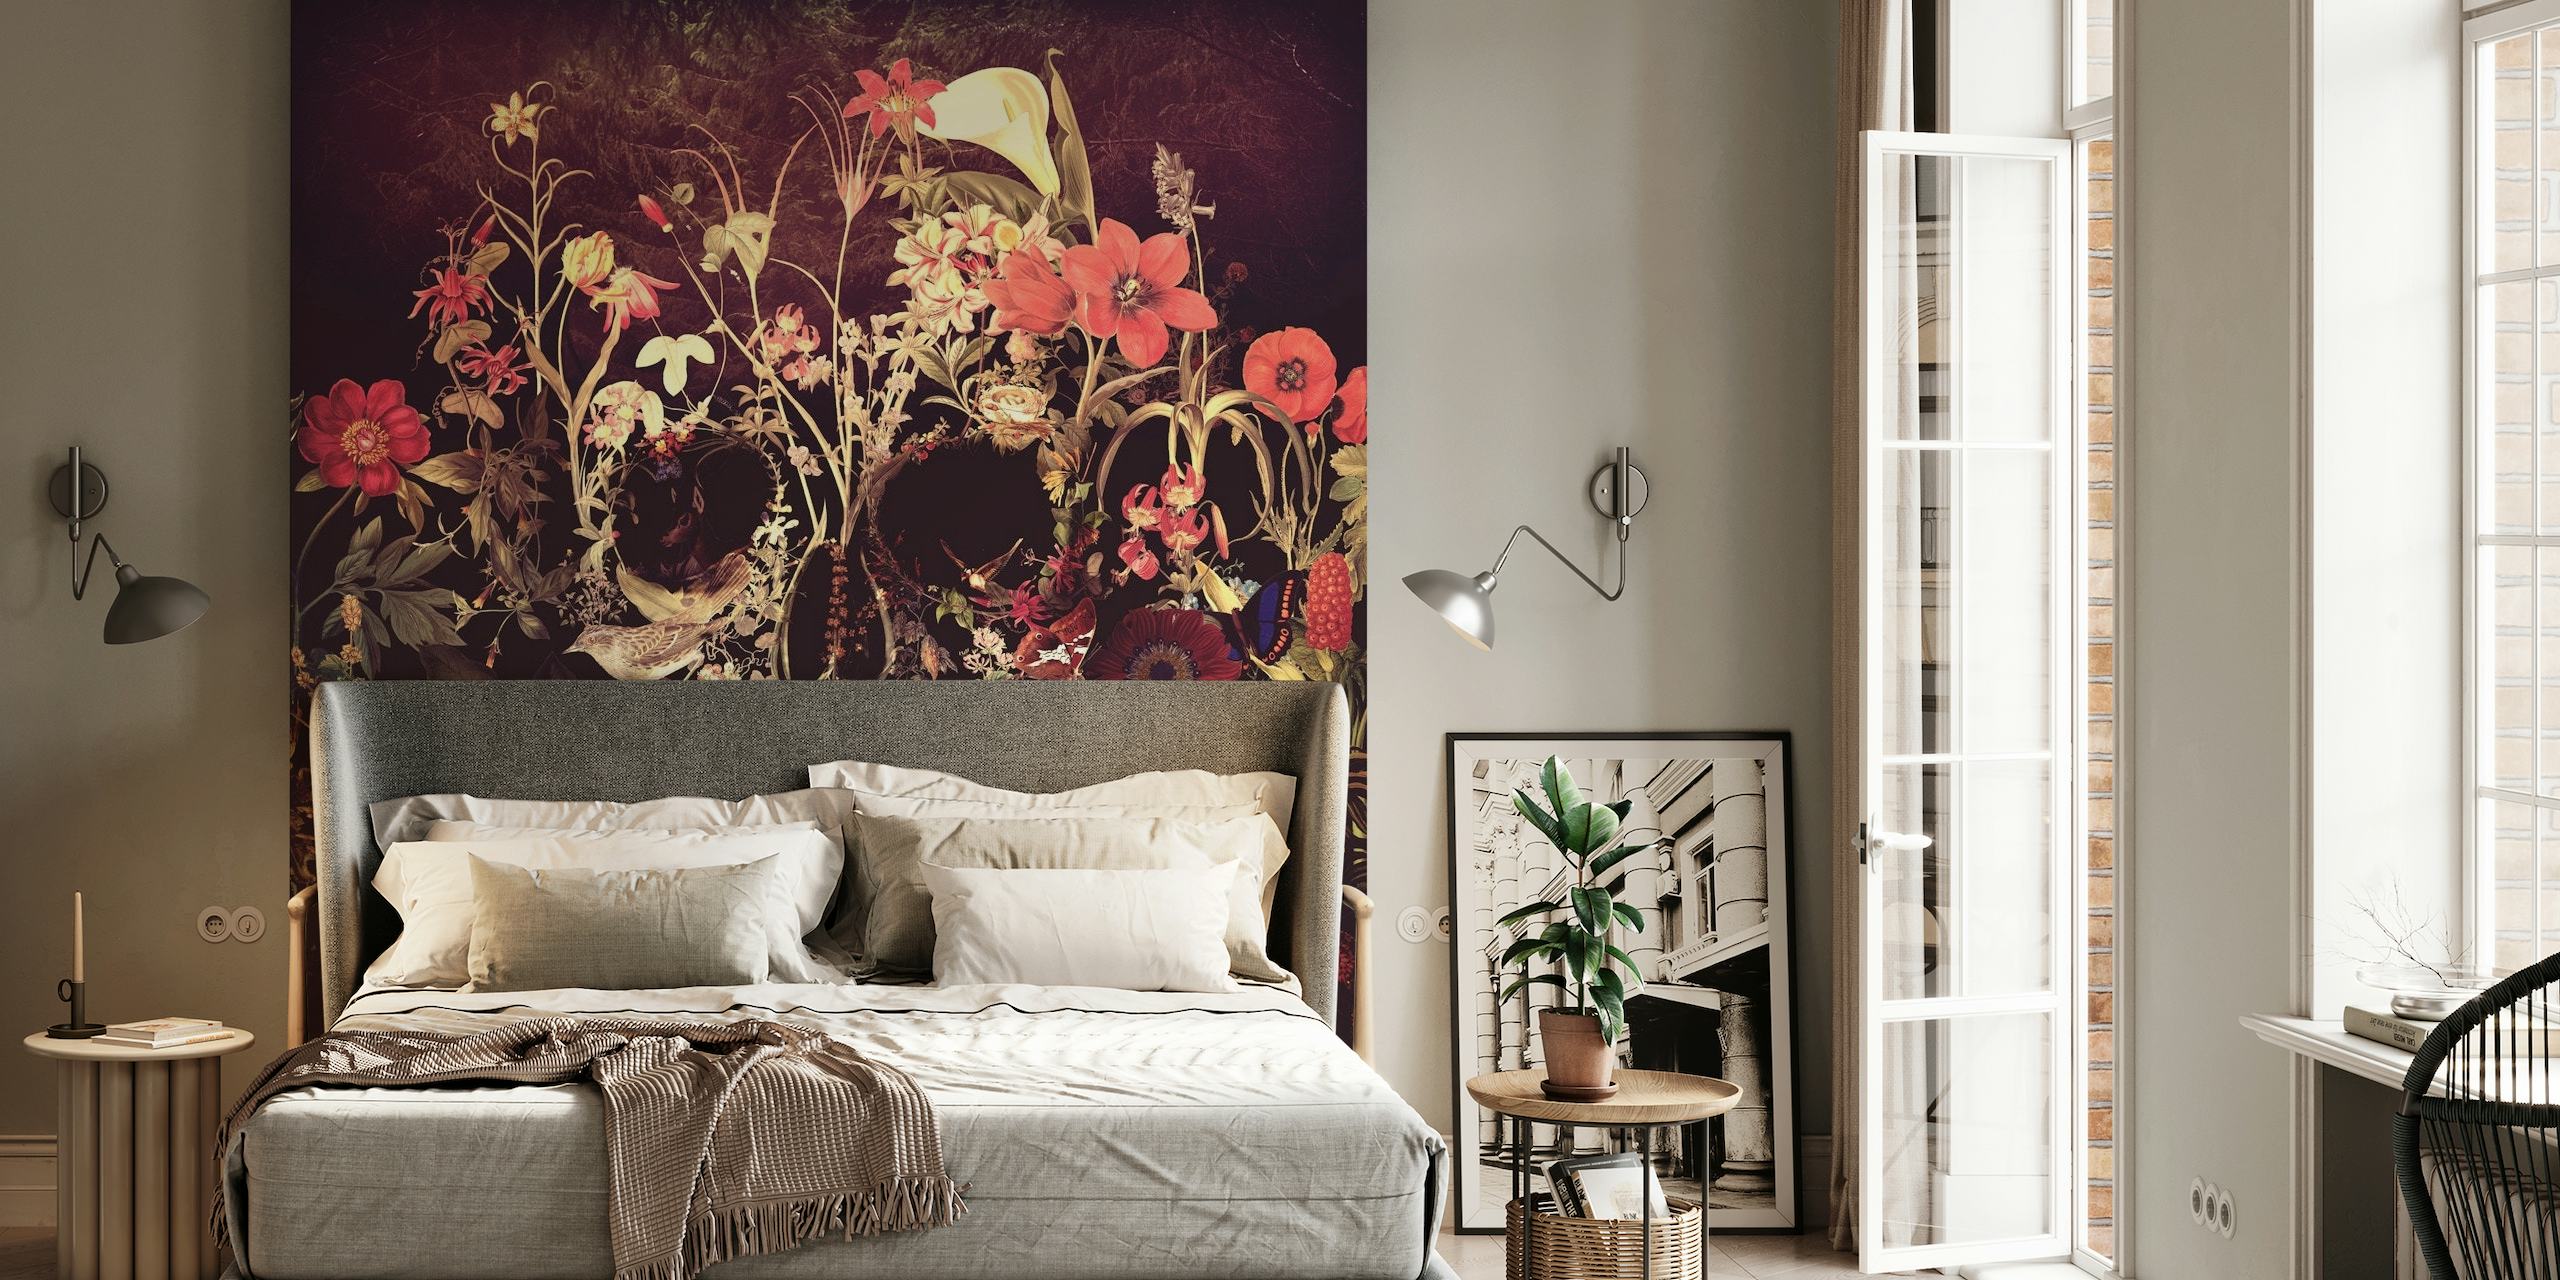 A dark, floral wall mural with a hidden skull design amidst vibrant blooming flowers